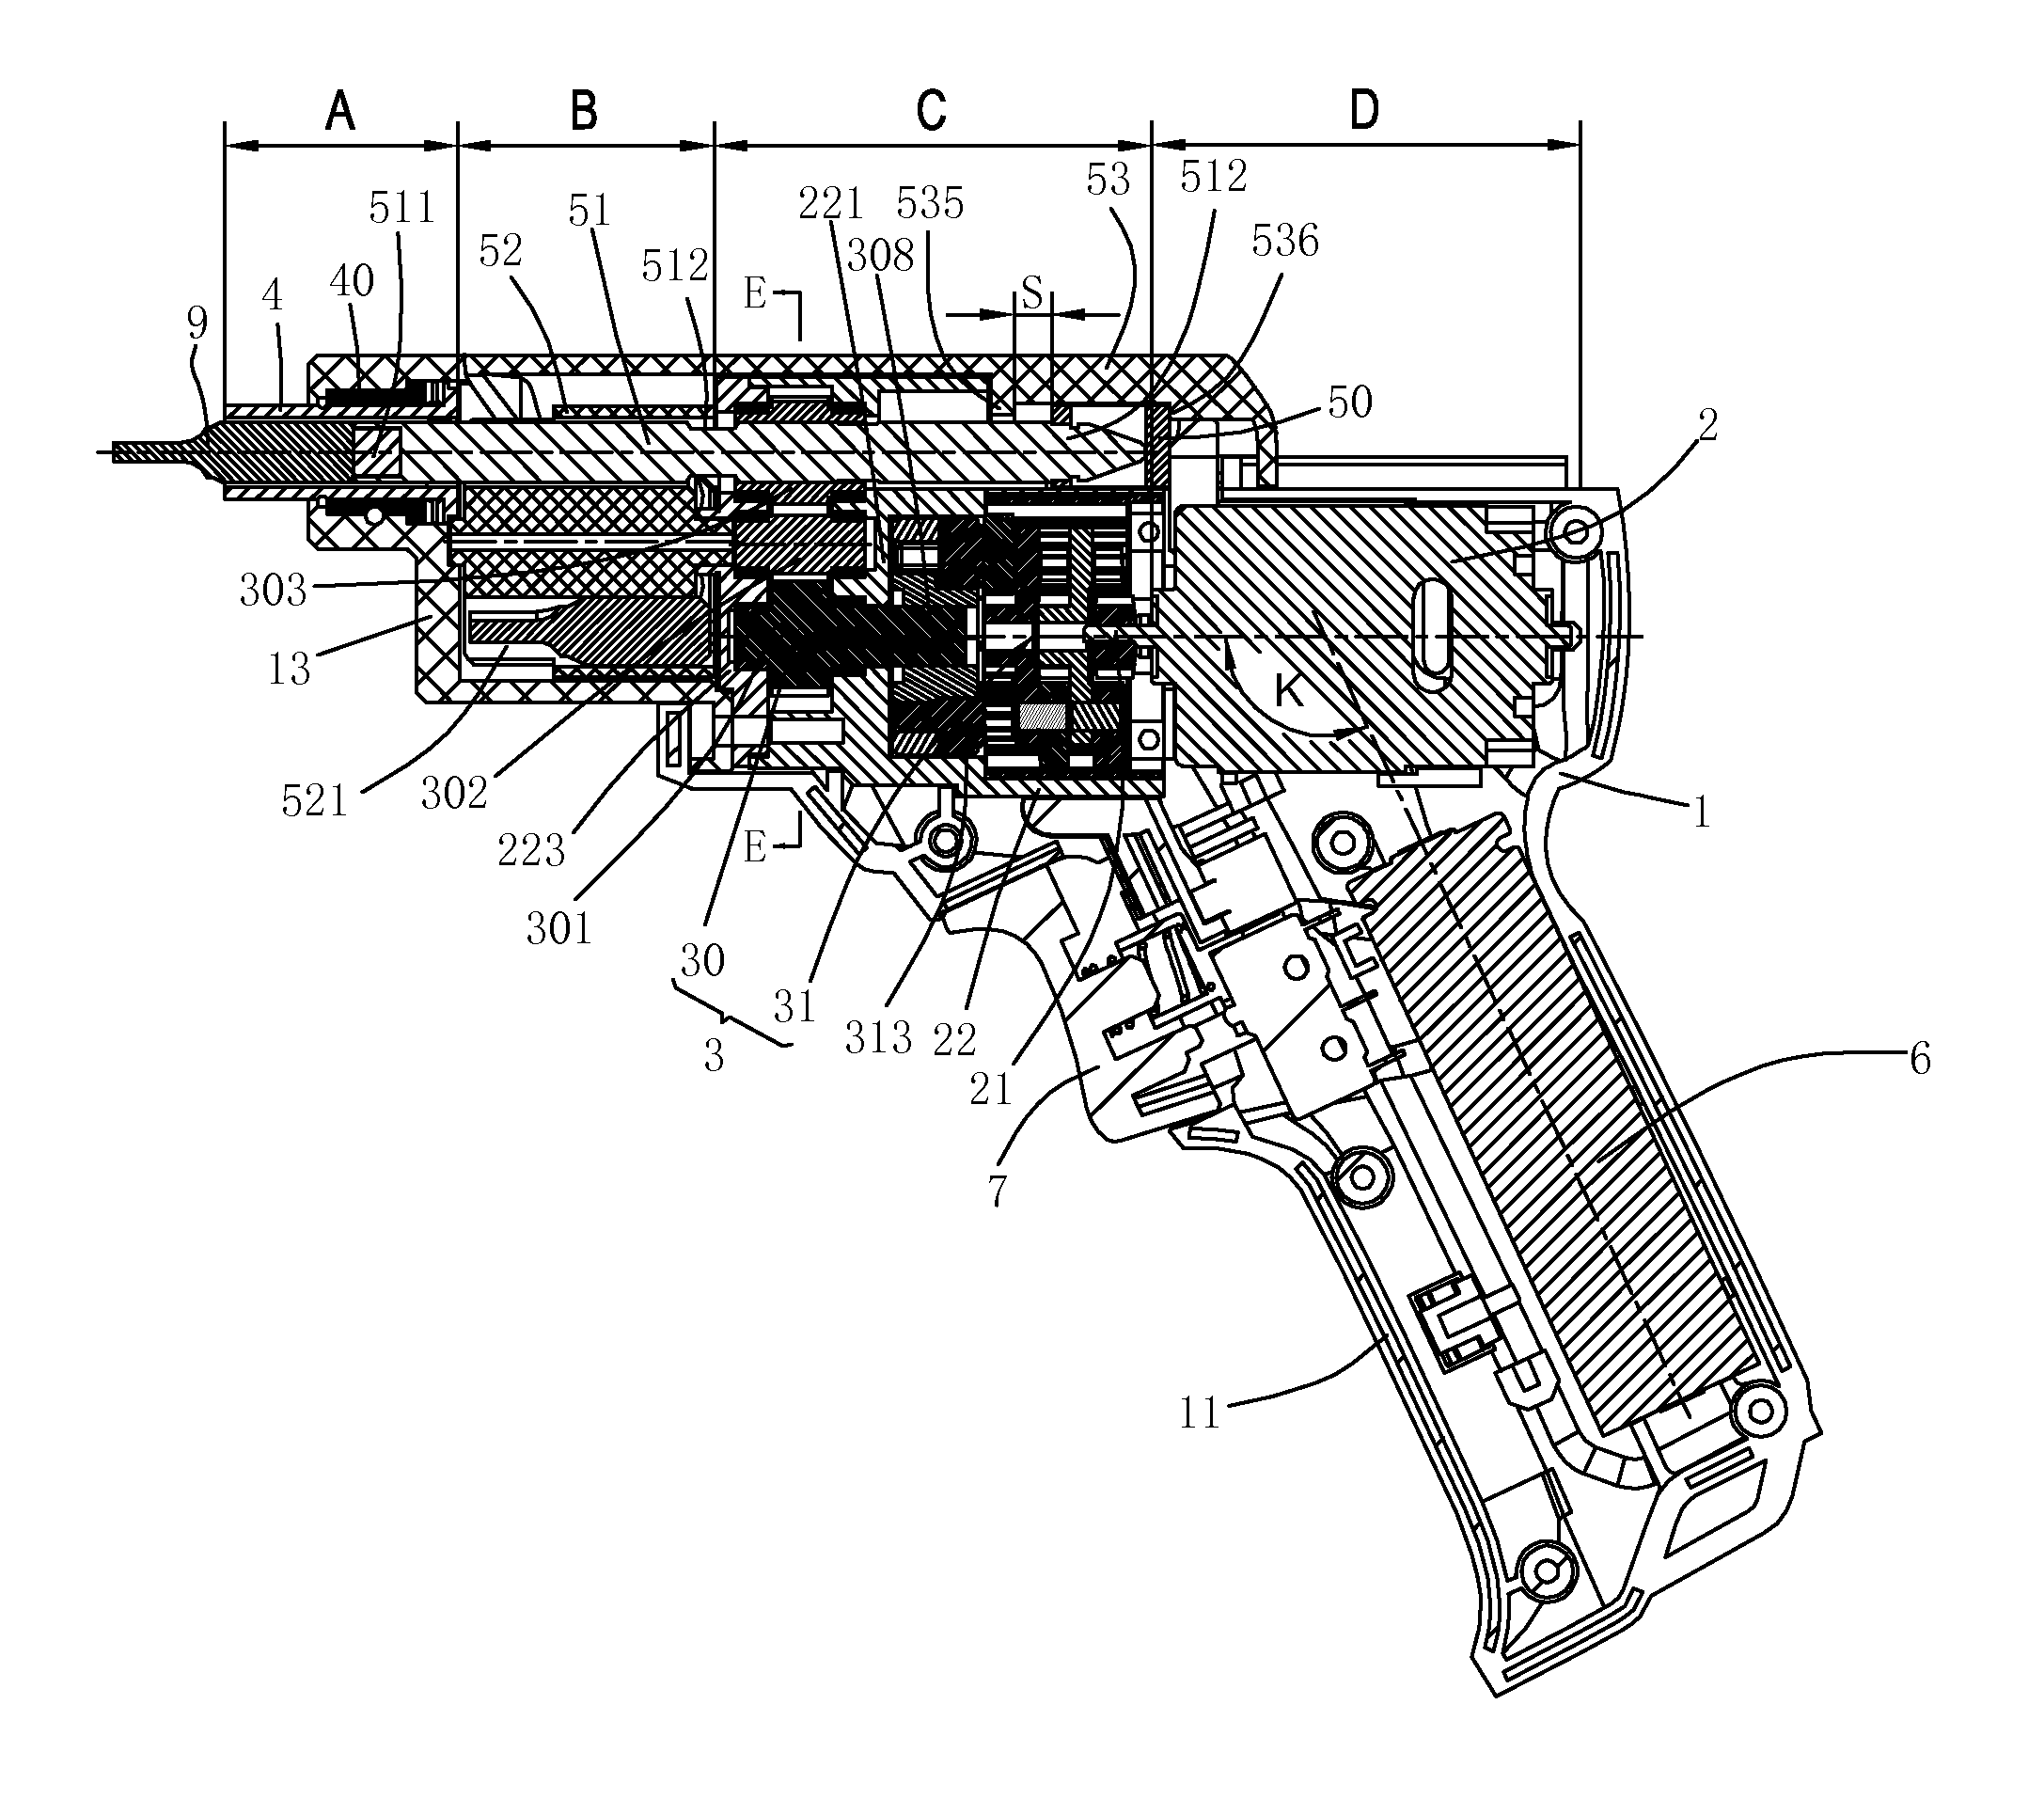 Power tool and operation method for the power tool